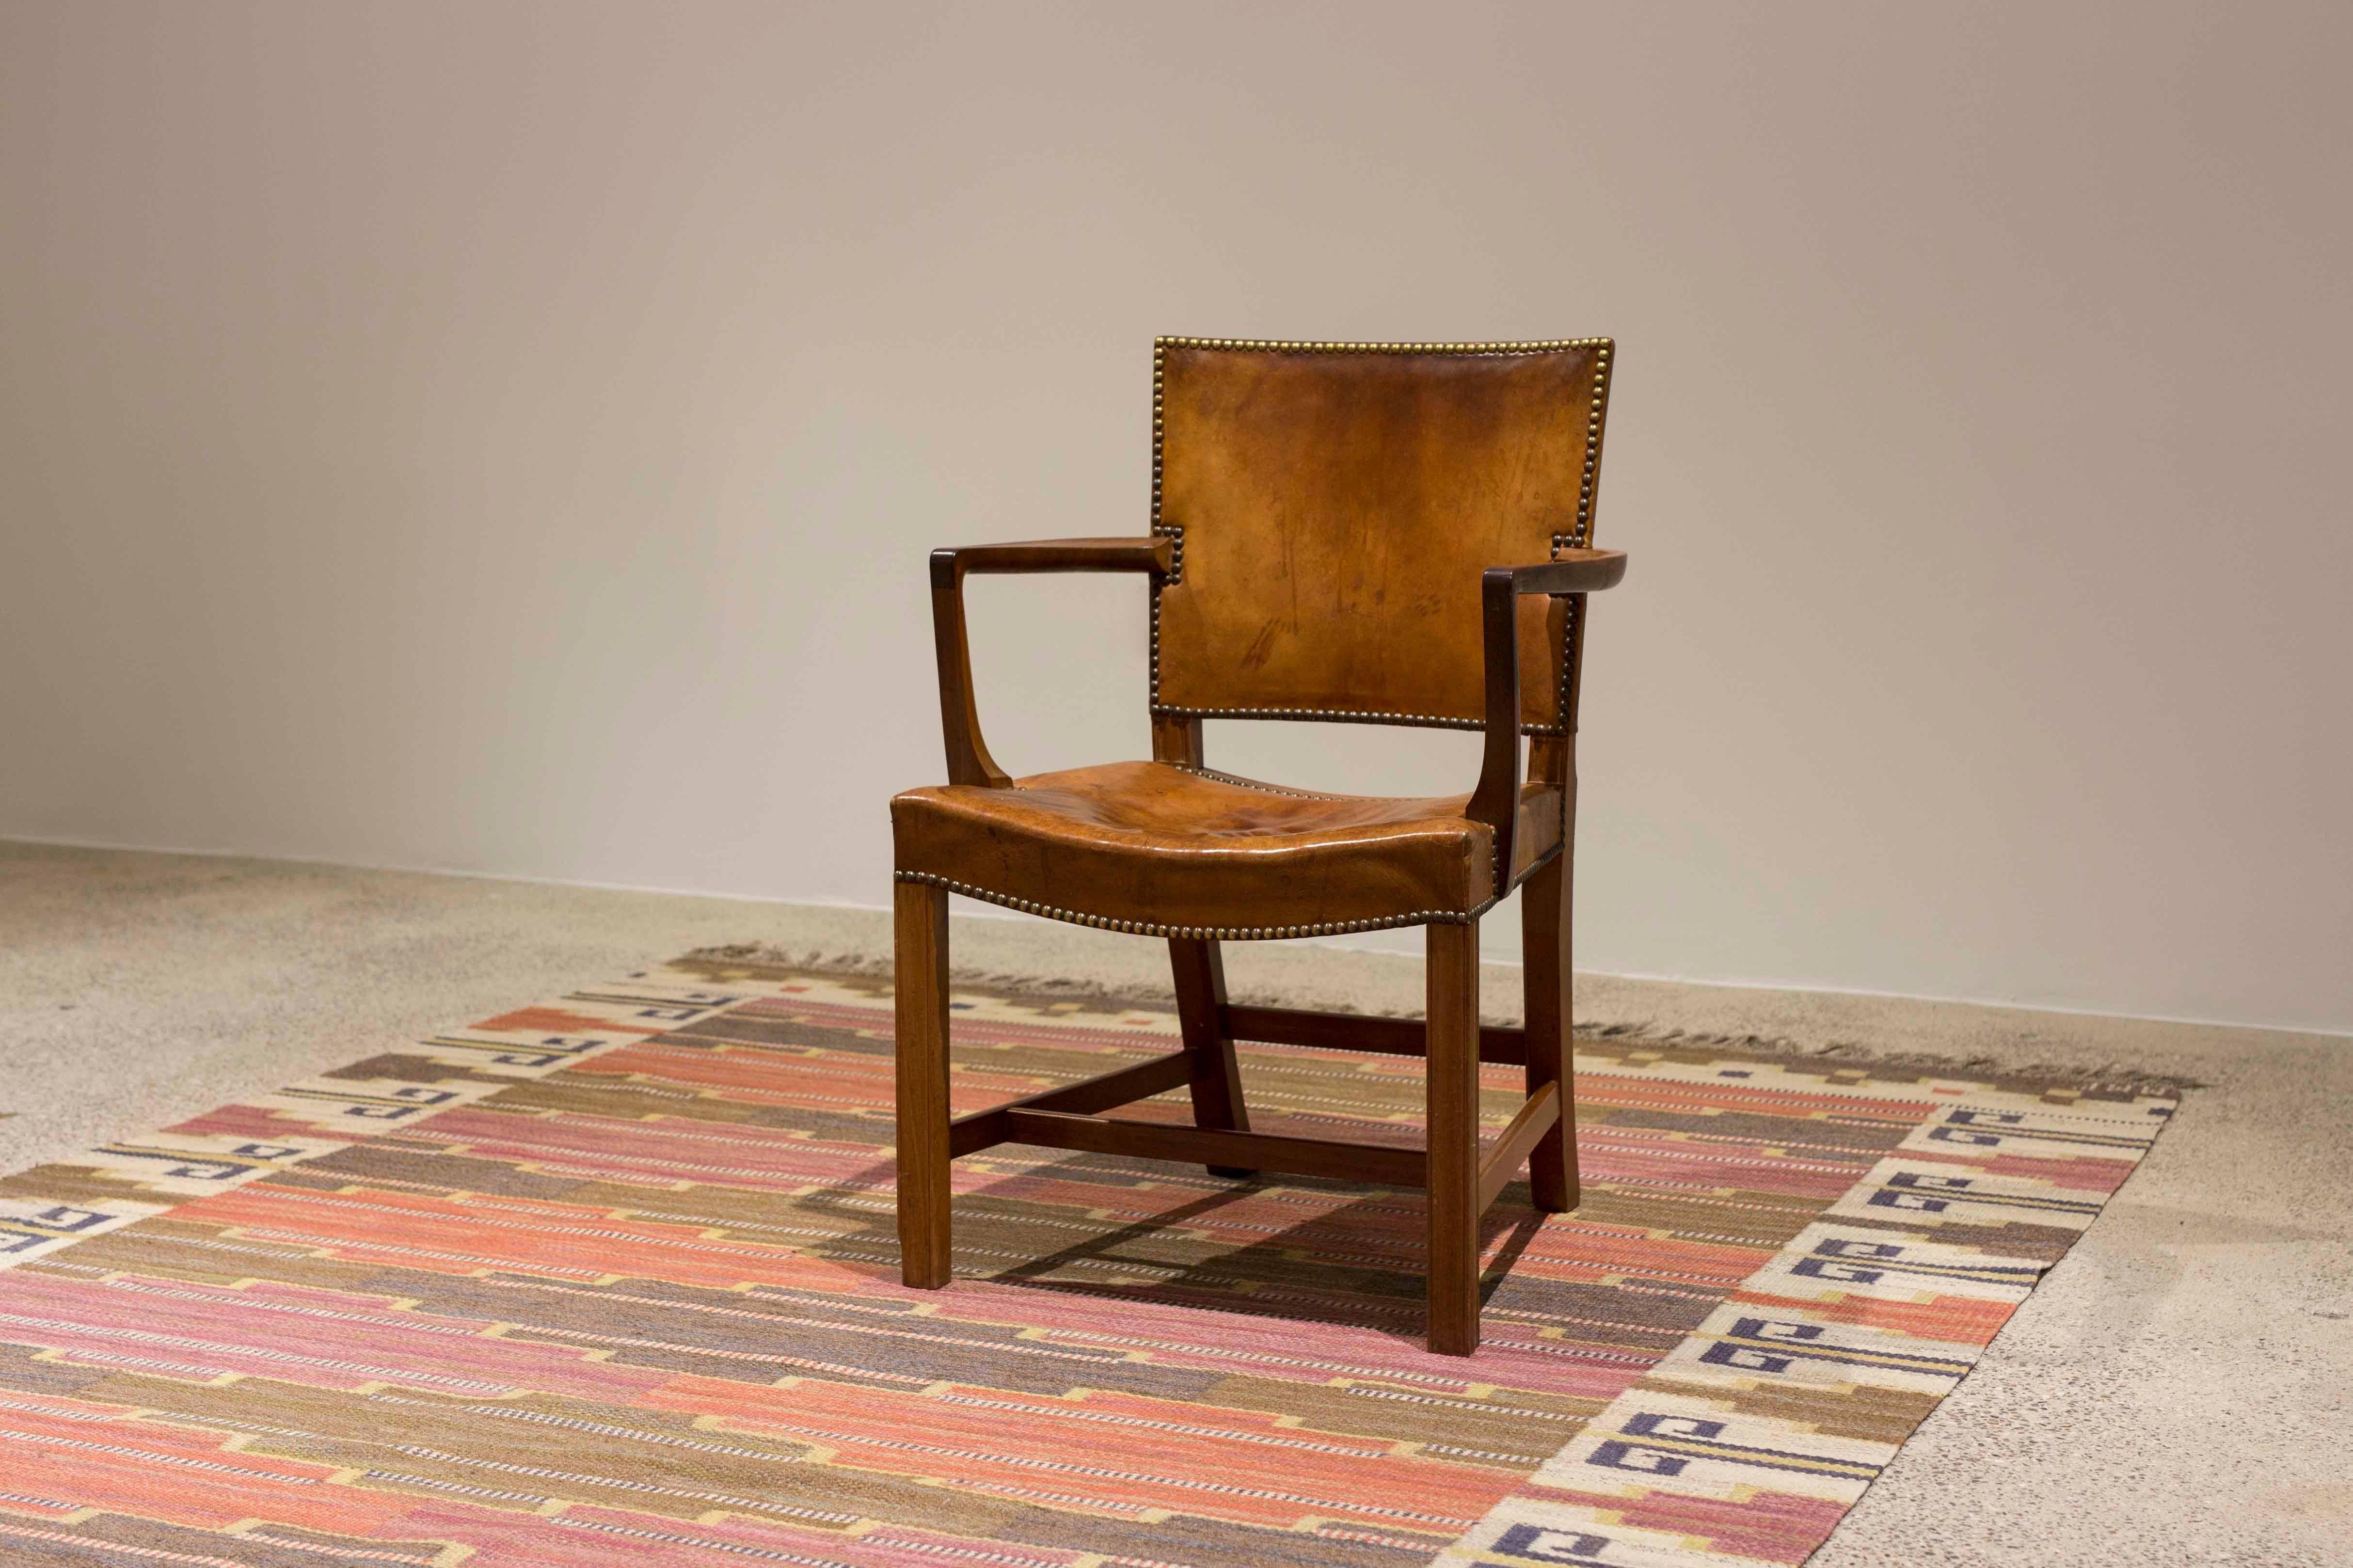 Early Kaare Klint 'Red chair' with frame of Cuban mahogany and original patinated Nigerian leather. 
Designed 1930 and executed at Rud. Rasmussen, Denmark, 1930s. 
Natural patina to wooden frame and leather. 

Additional photos and condition